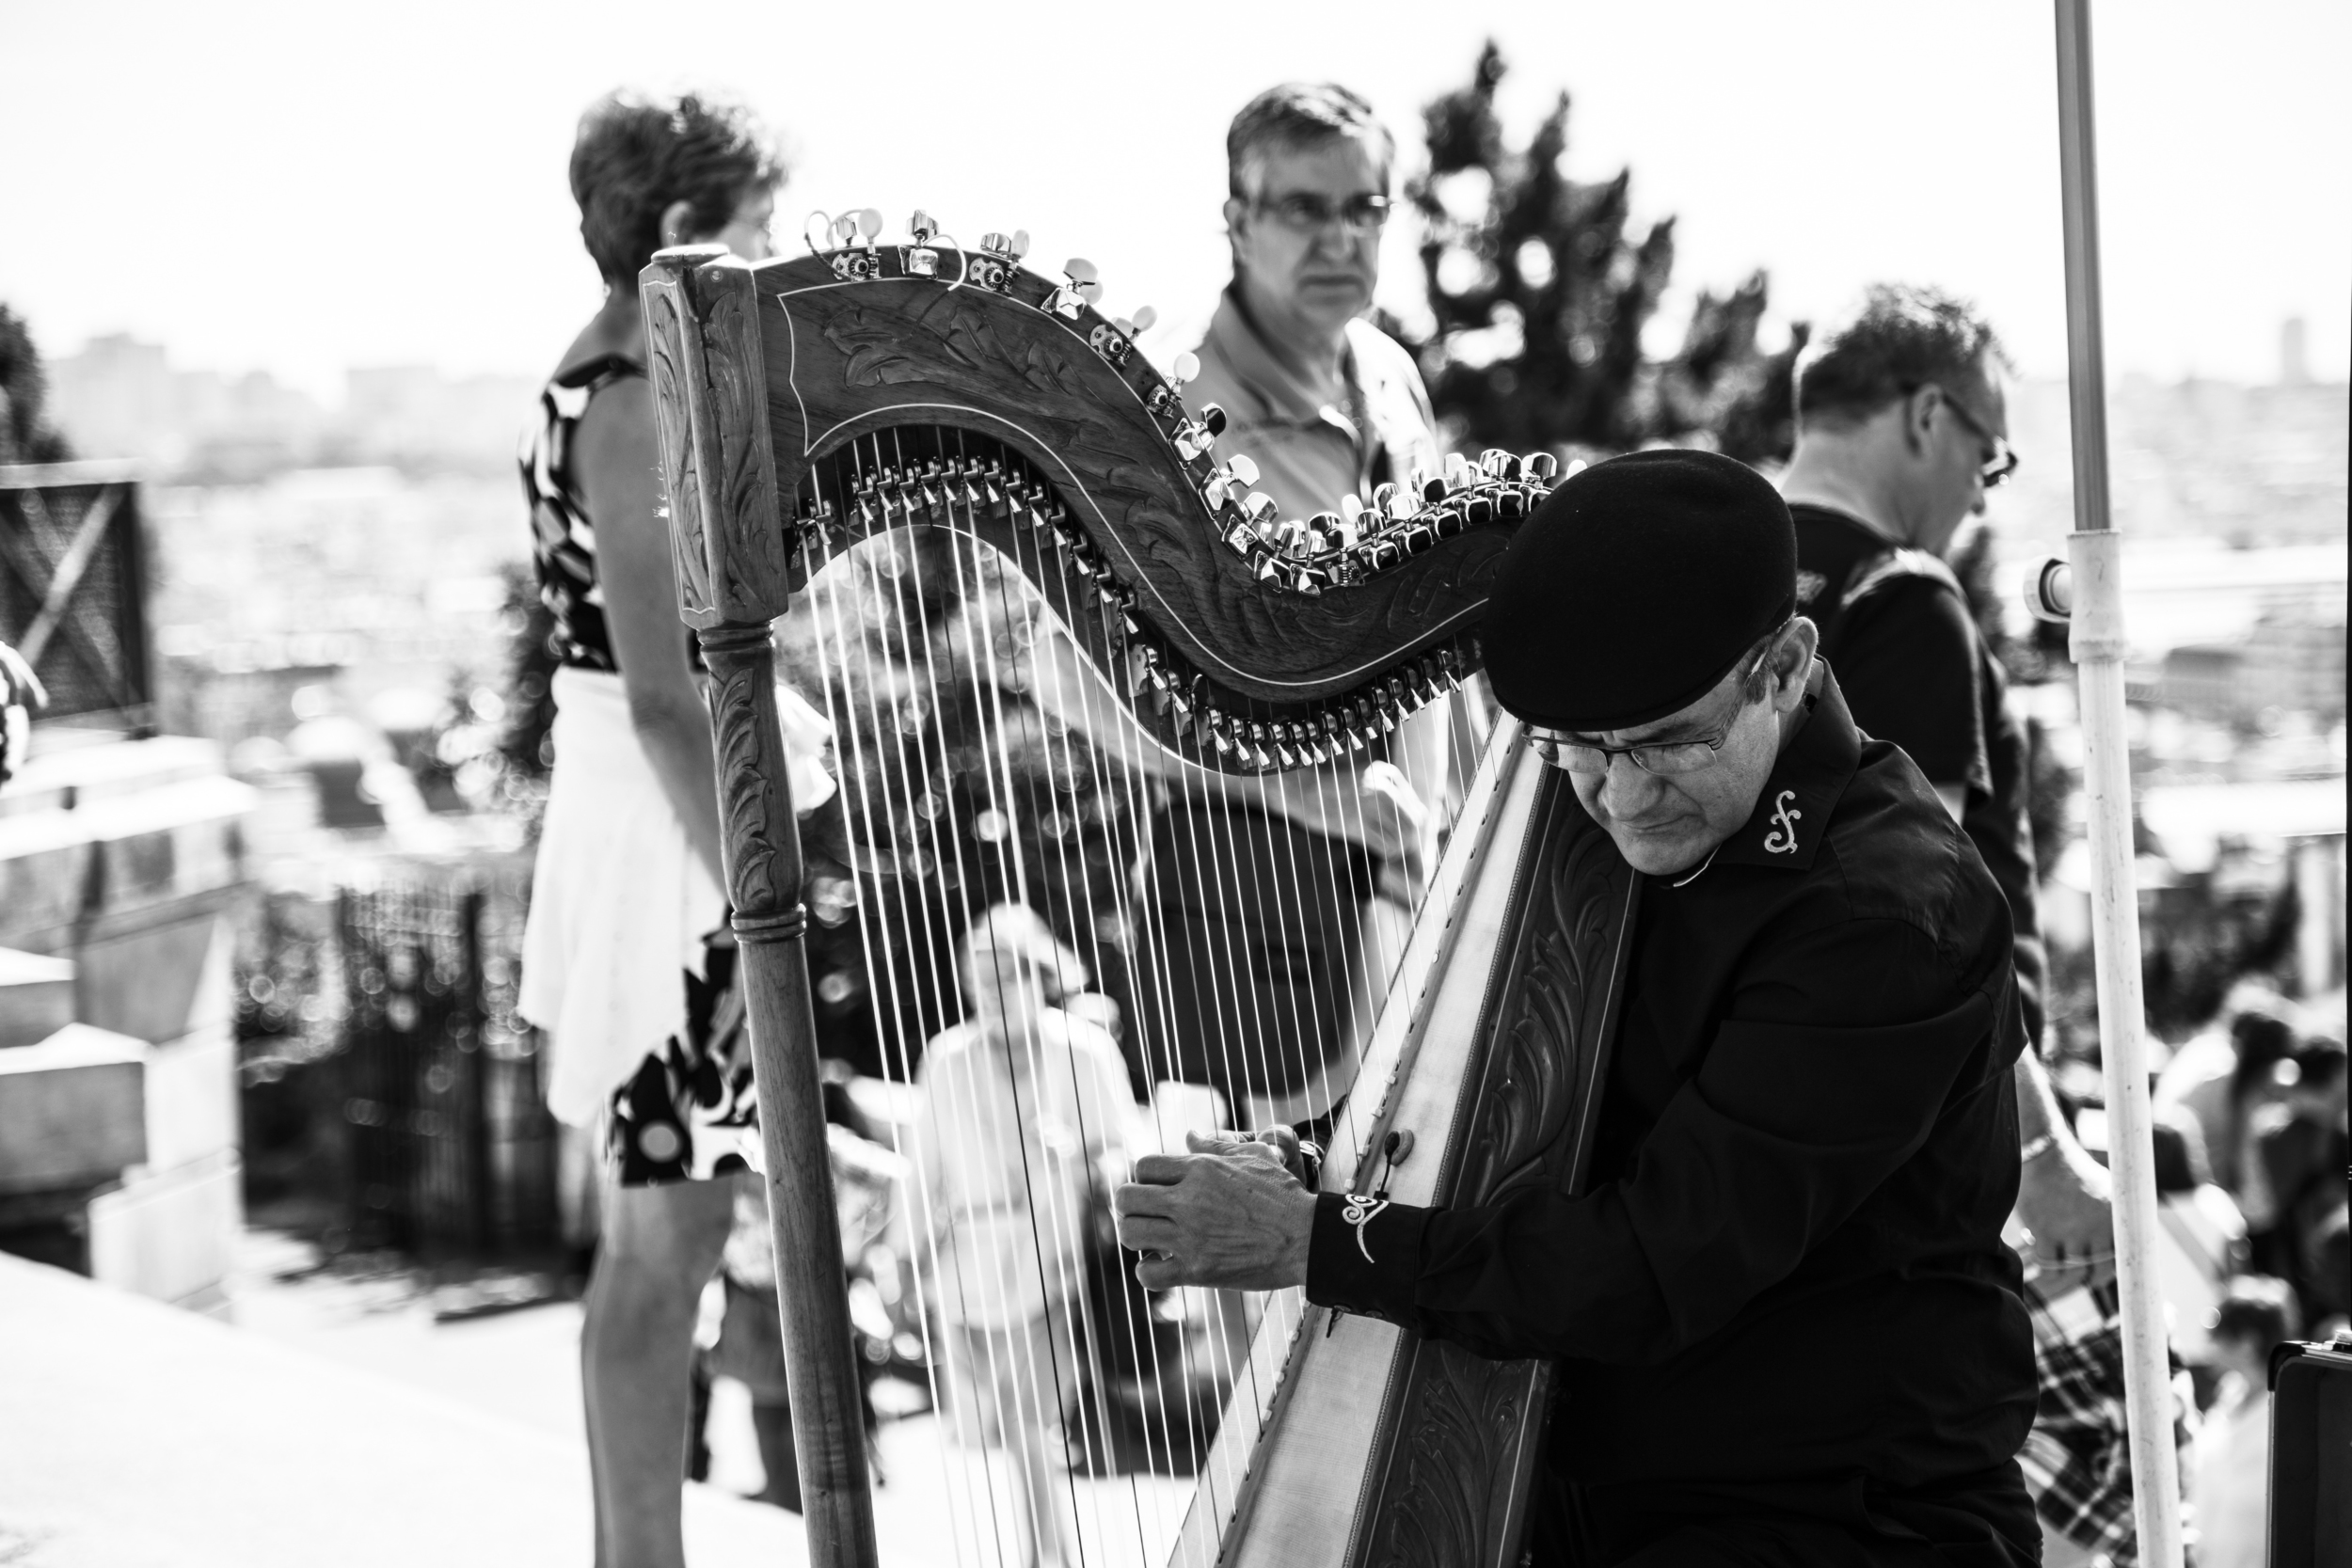 A local man playing a harp